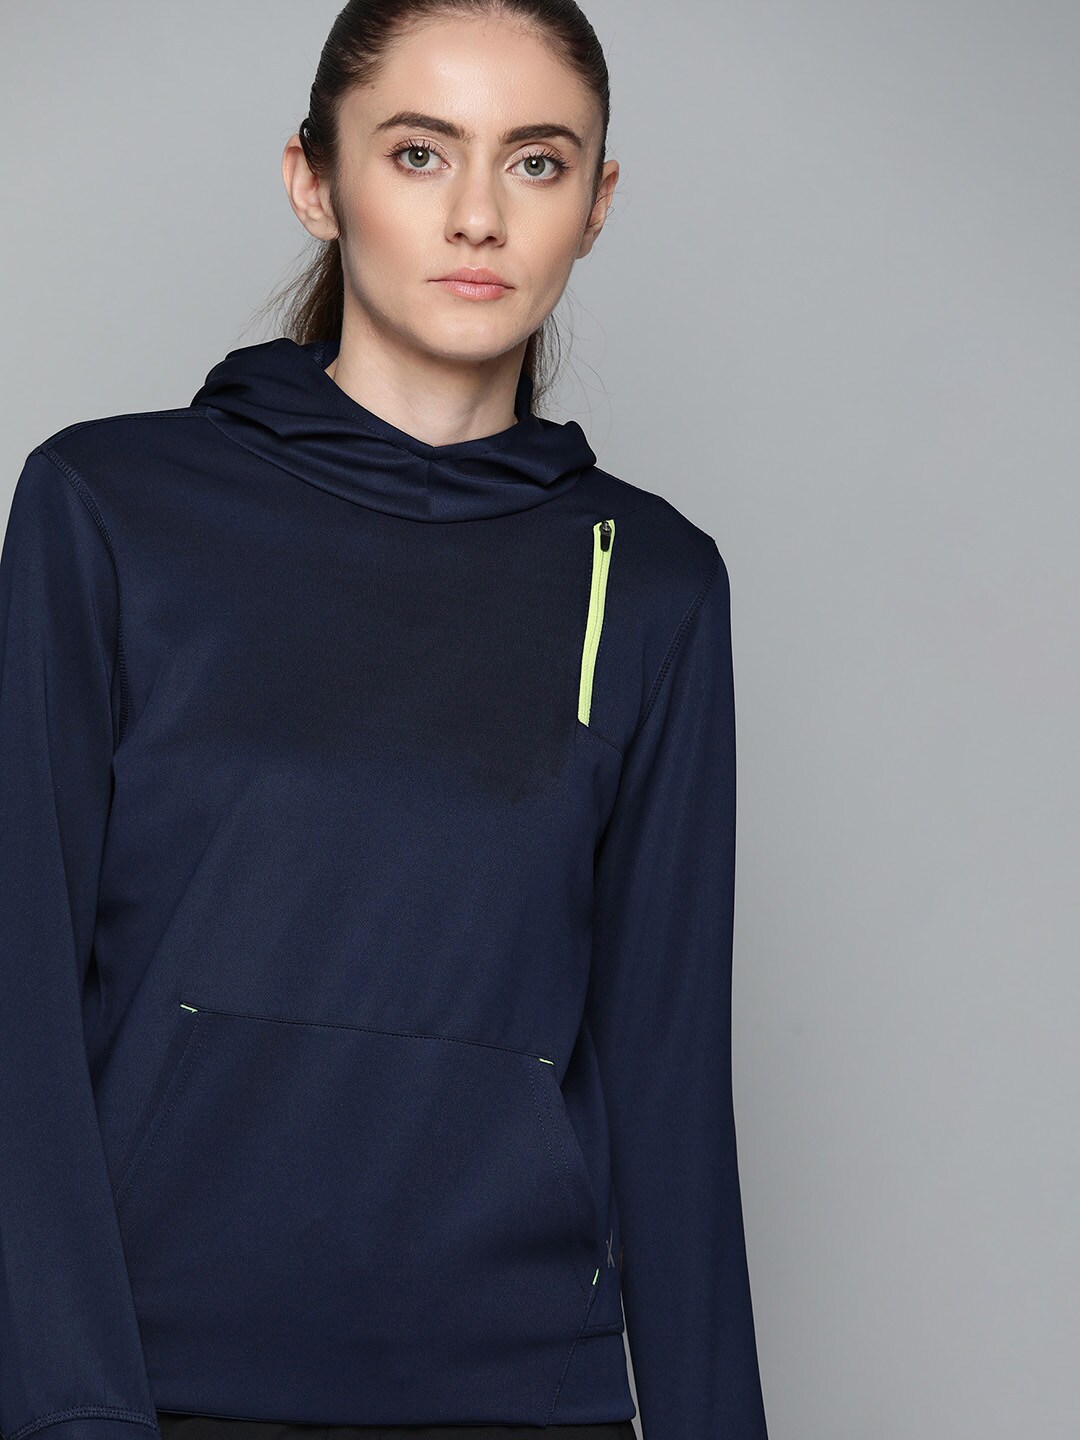 HRX By Hrithik Roshan Outdoor Women Medieval Blue Rapid-Dry Solid Sweatshirts Price in India